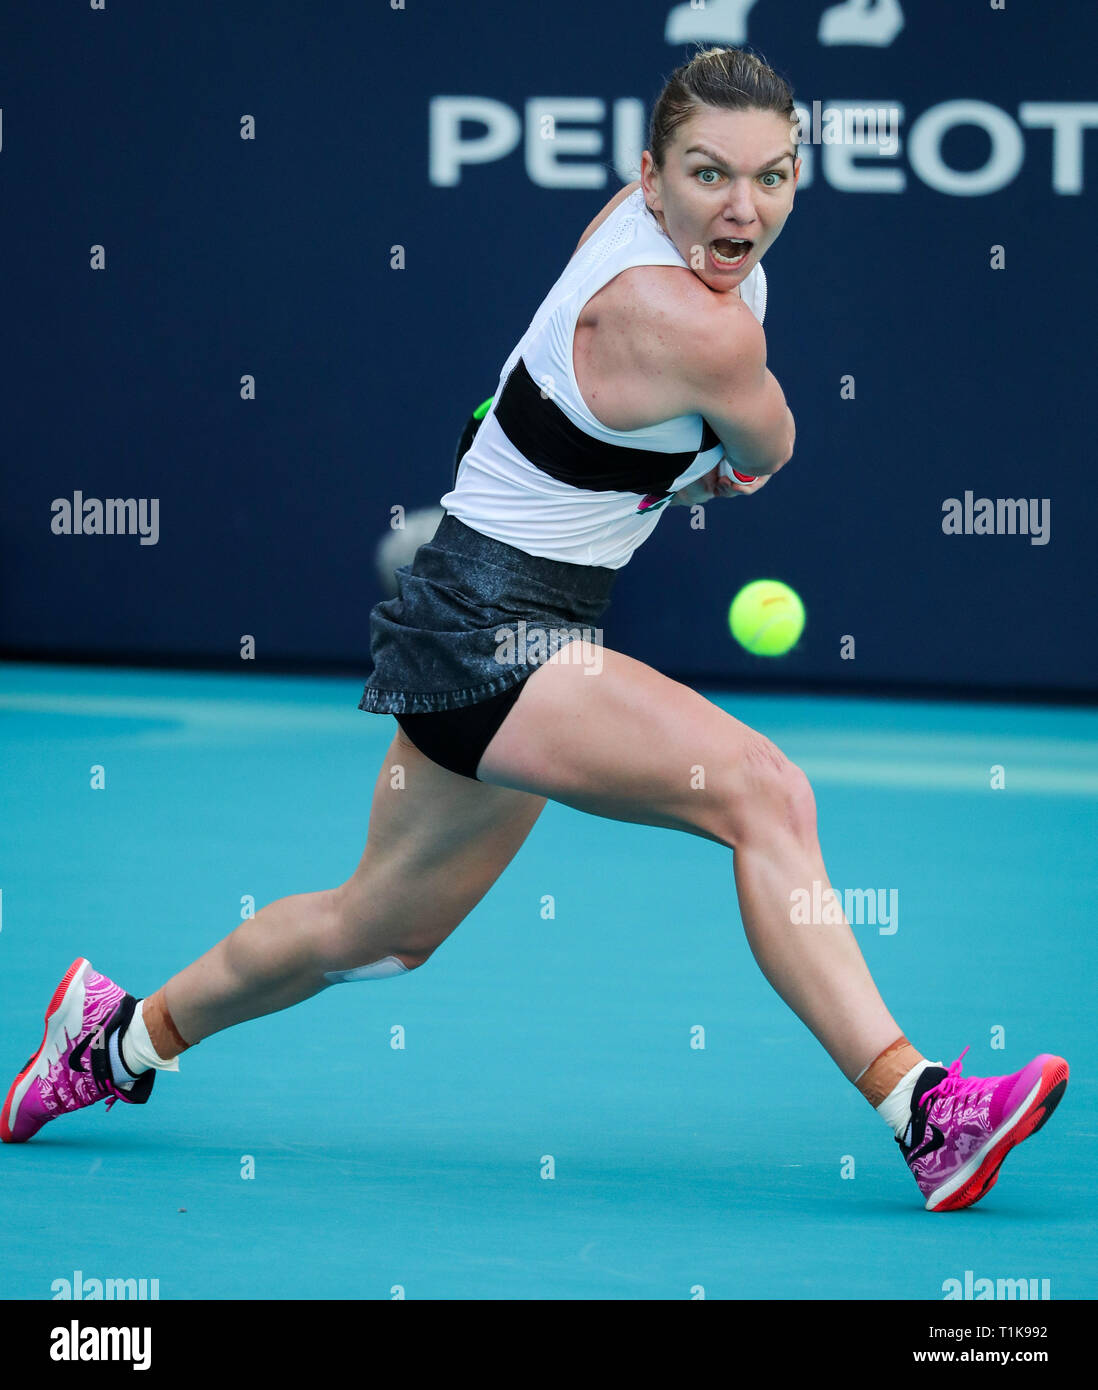 Miami Gardens, Florida, USA. 27th Mar, 2019. Simona Halep, of Romania, in action against Qiang Wang, of China, during a quarter-finals match at the 2019 Miami Open Presented by Itau professional tennis tournament, played at the Hardrock Stadium in Miami Gardens, Florida, USA. Halep won 6-4, 7-5. Mario Houben/CSM/Alamy Live News Stock Photo